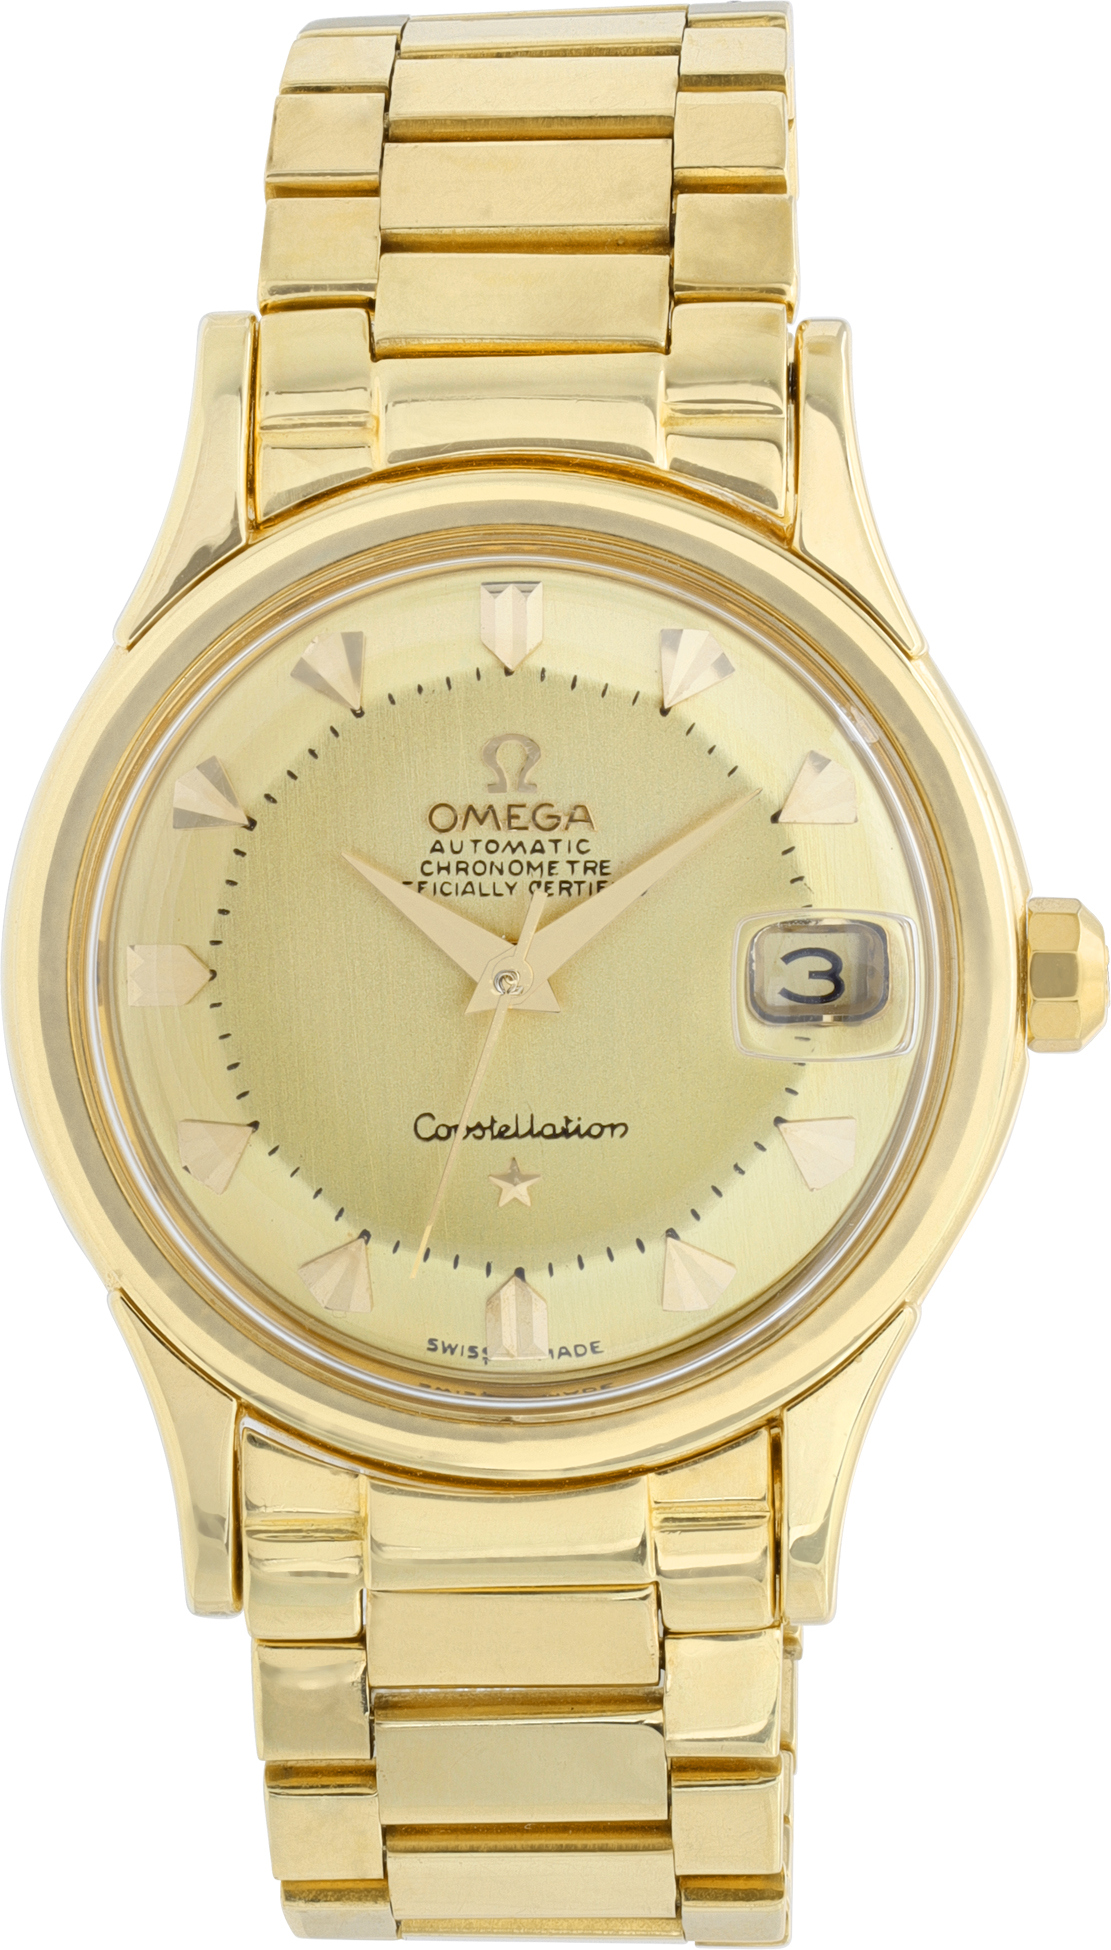 Omega Constellation 35mm 2943/2954 SC (Watches)